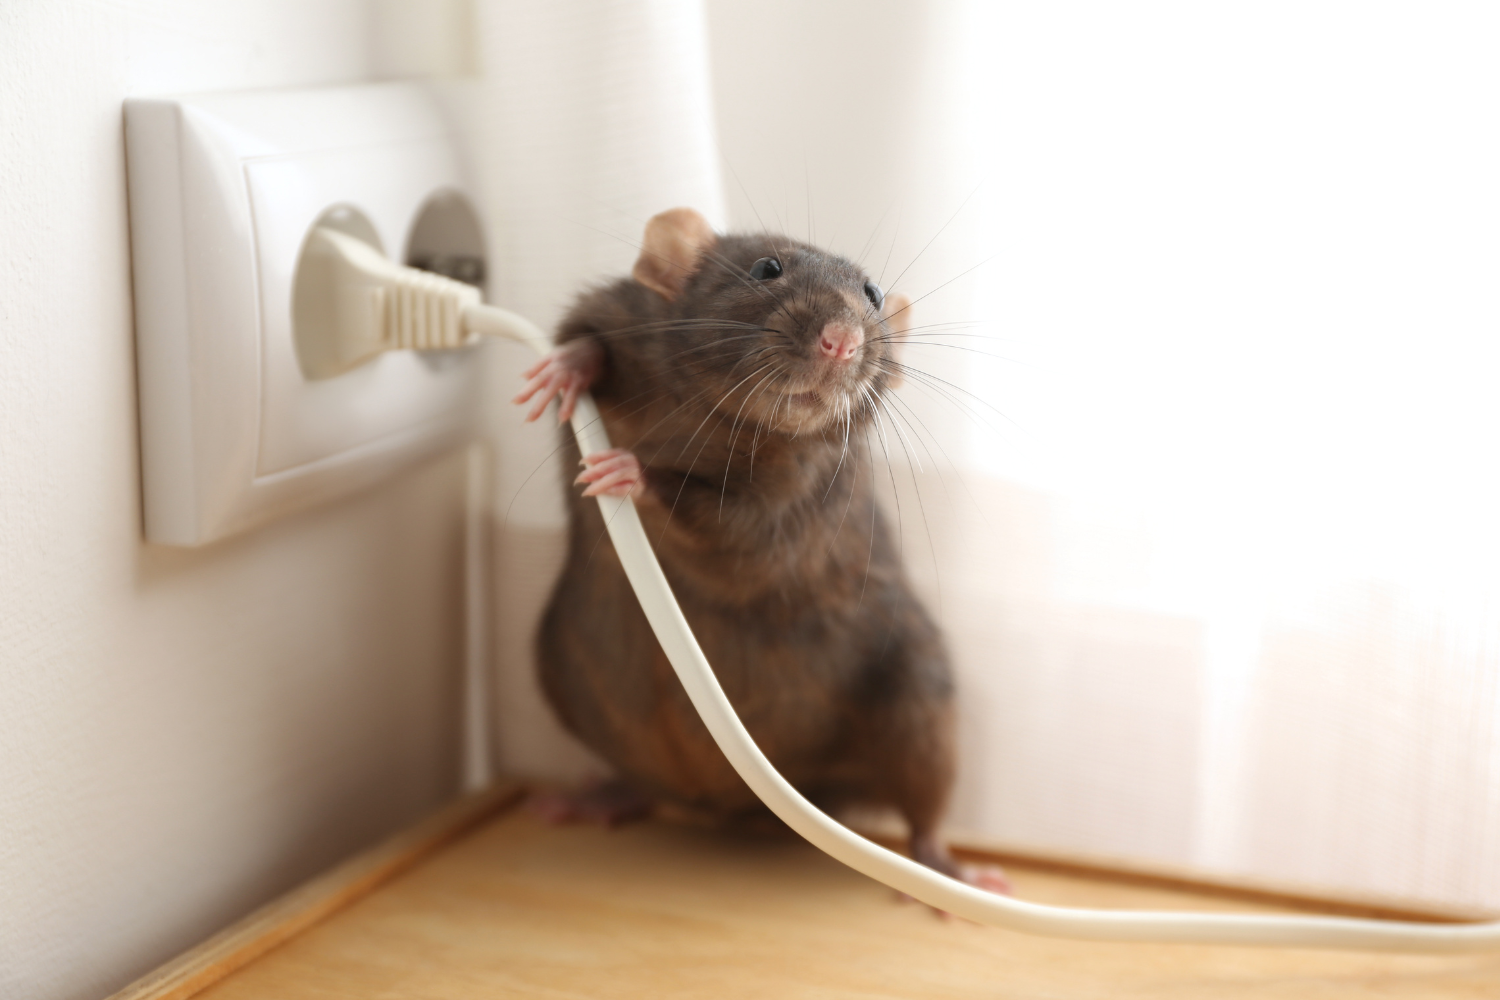 rodent chewing on electrical cord